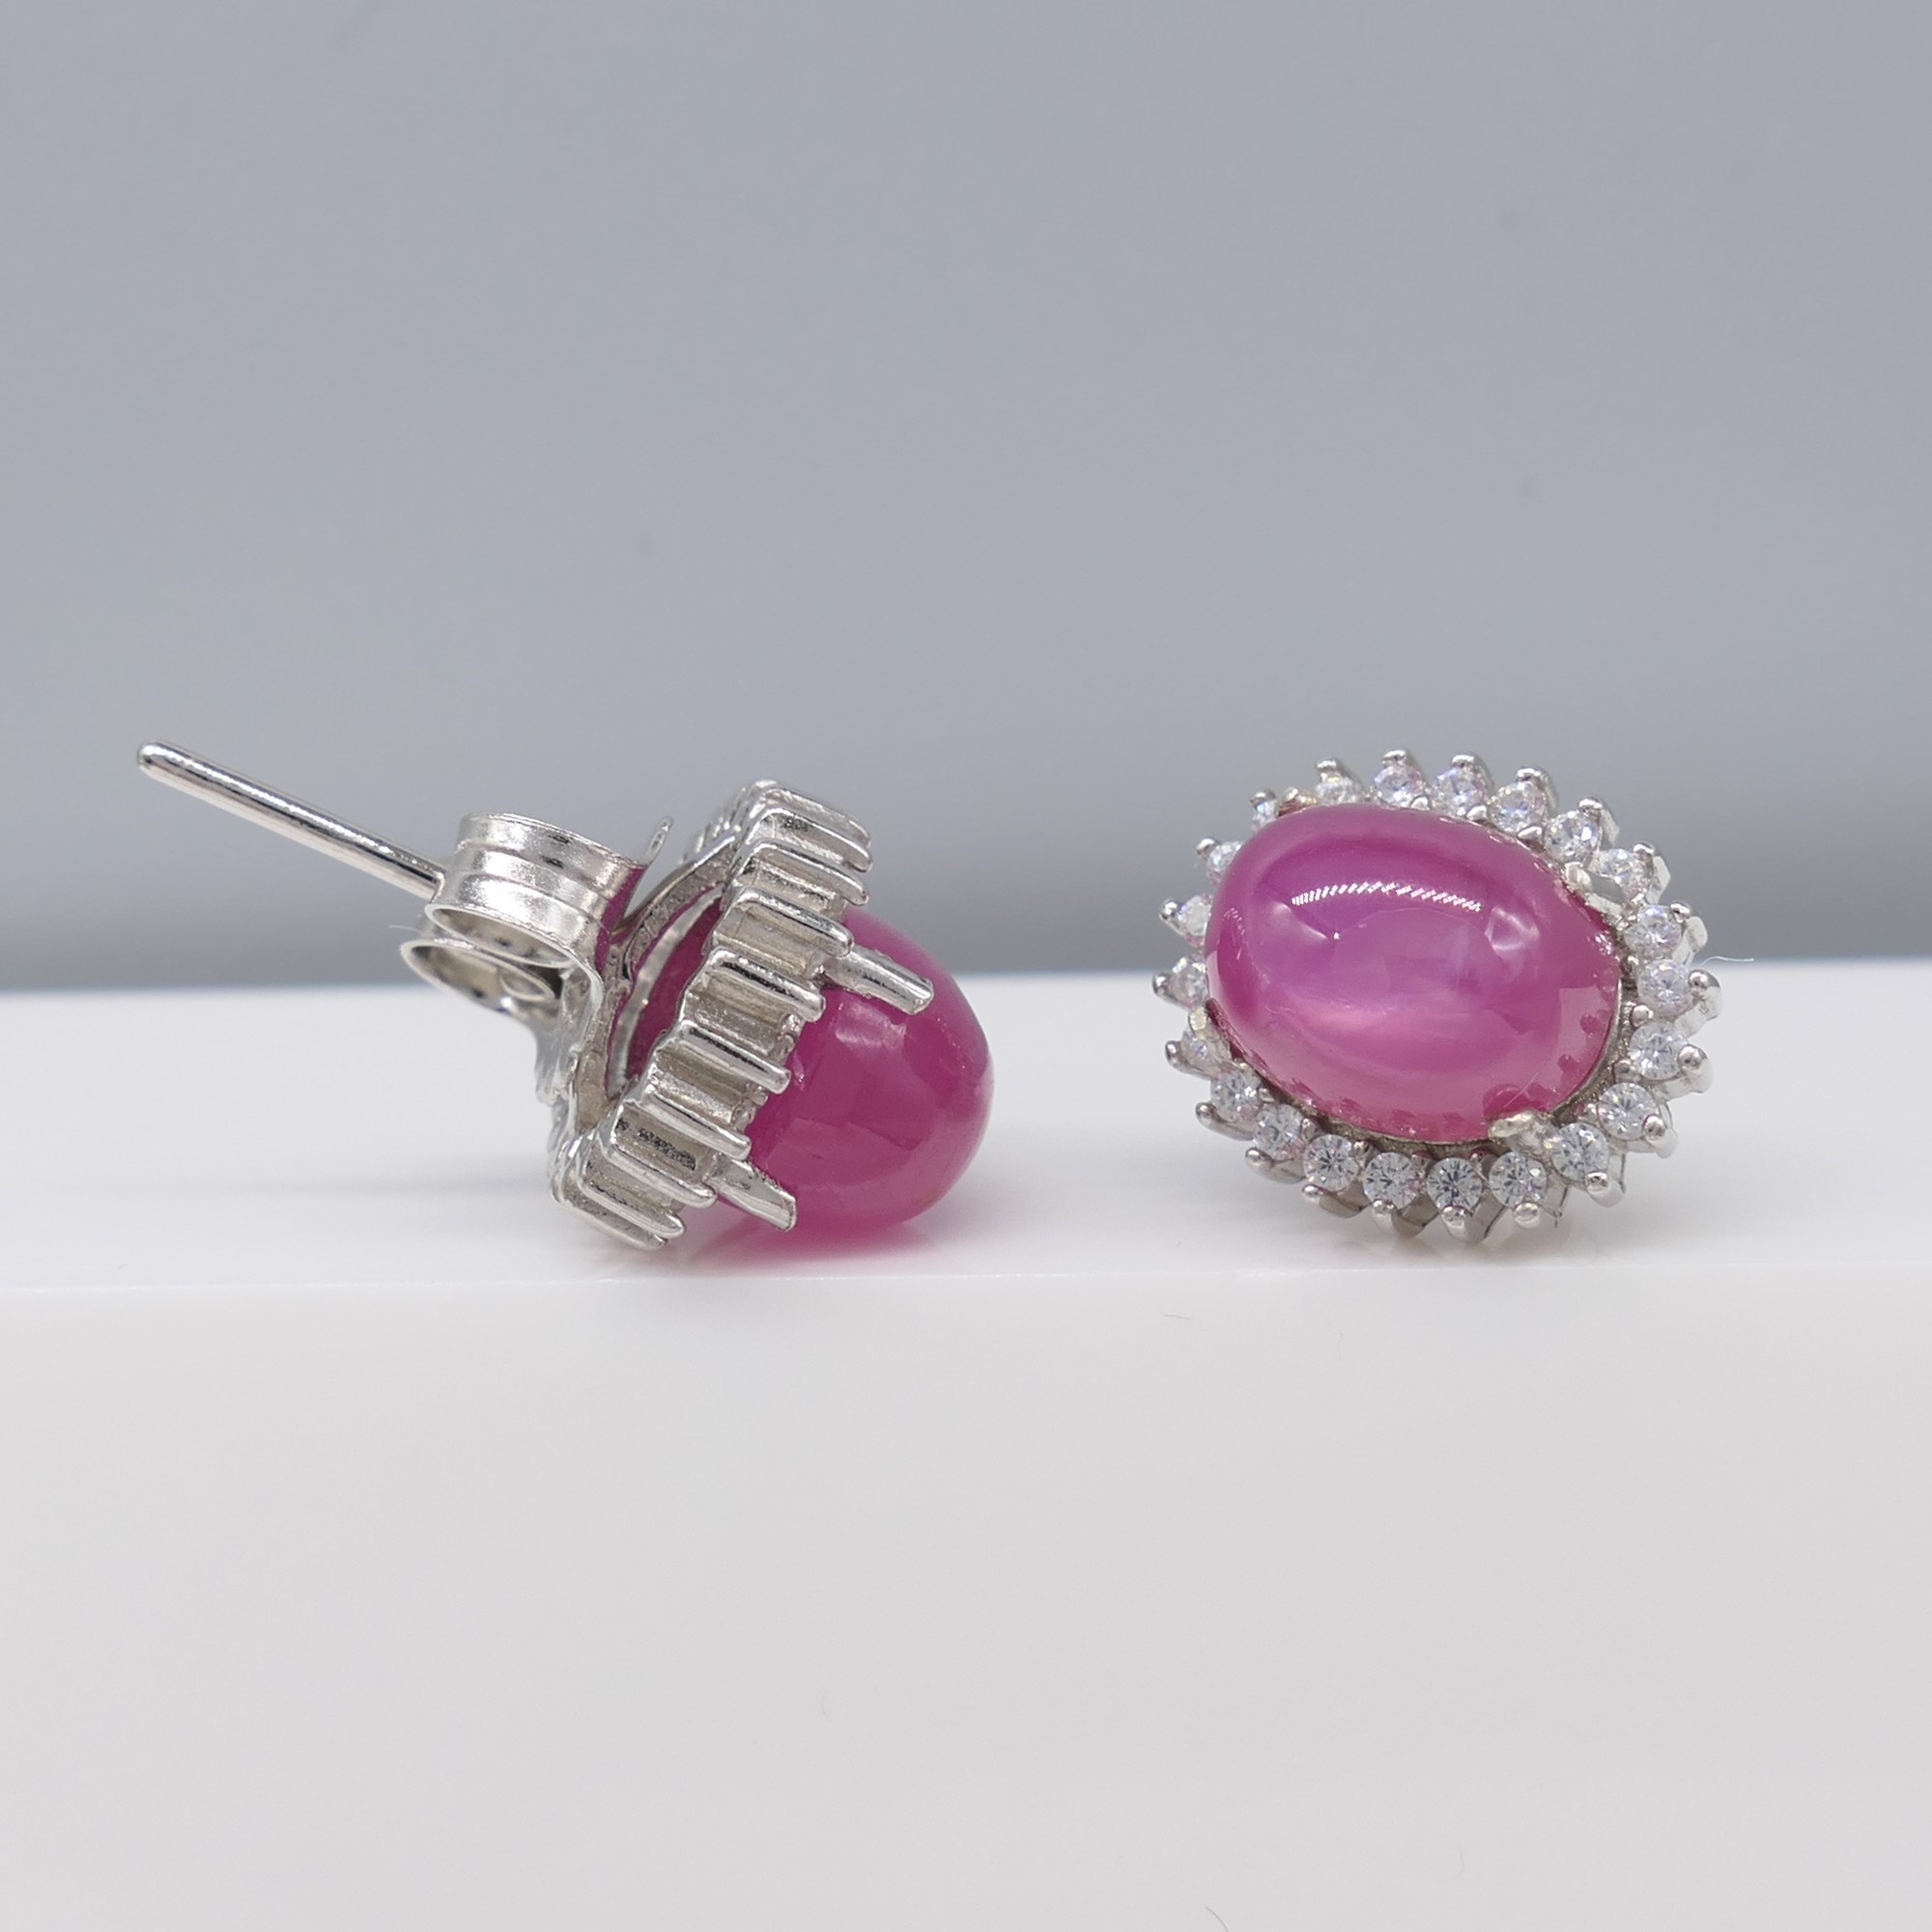 Cabochon Ruby Ear Studs In Sterling Silver, Boxed - Image 7 of 7